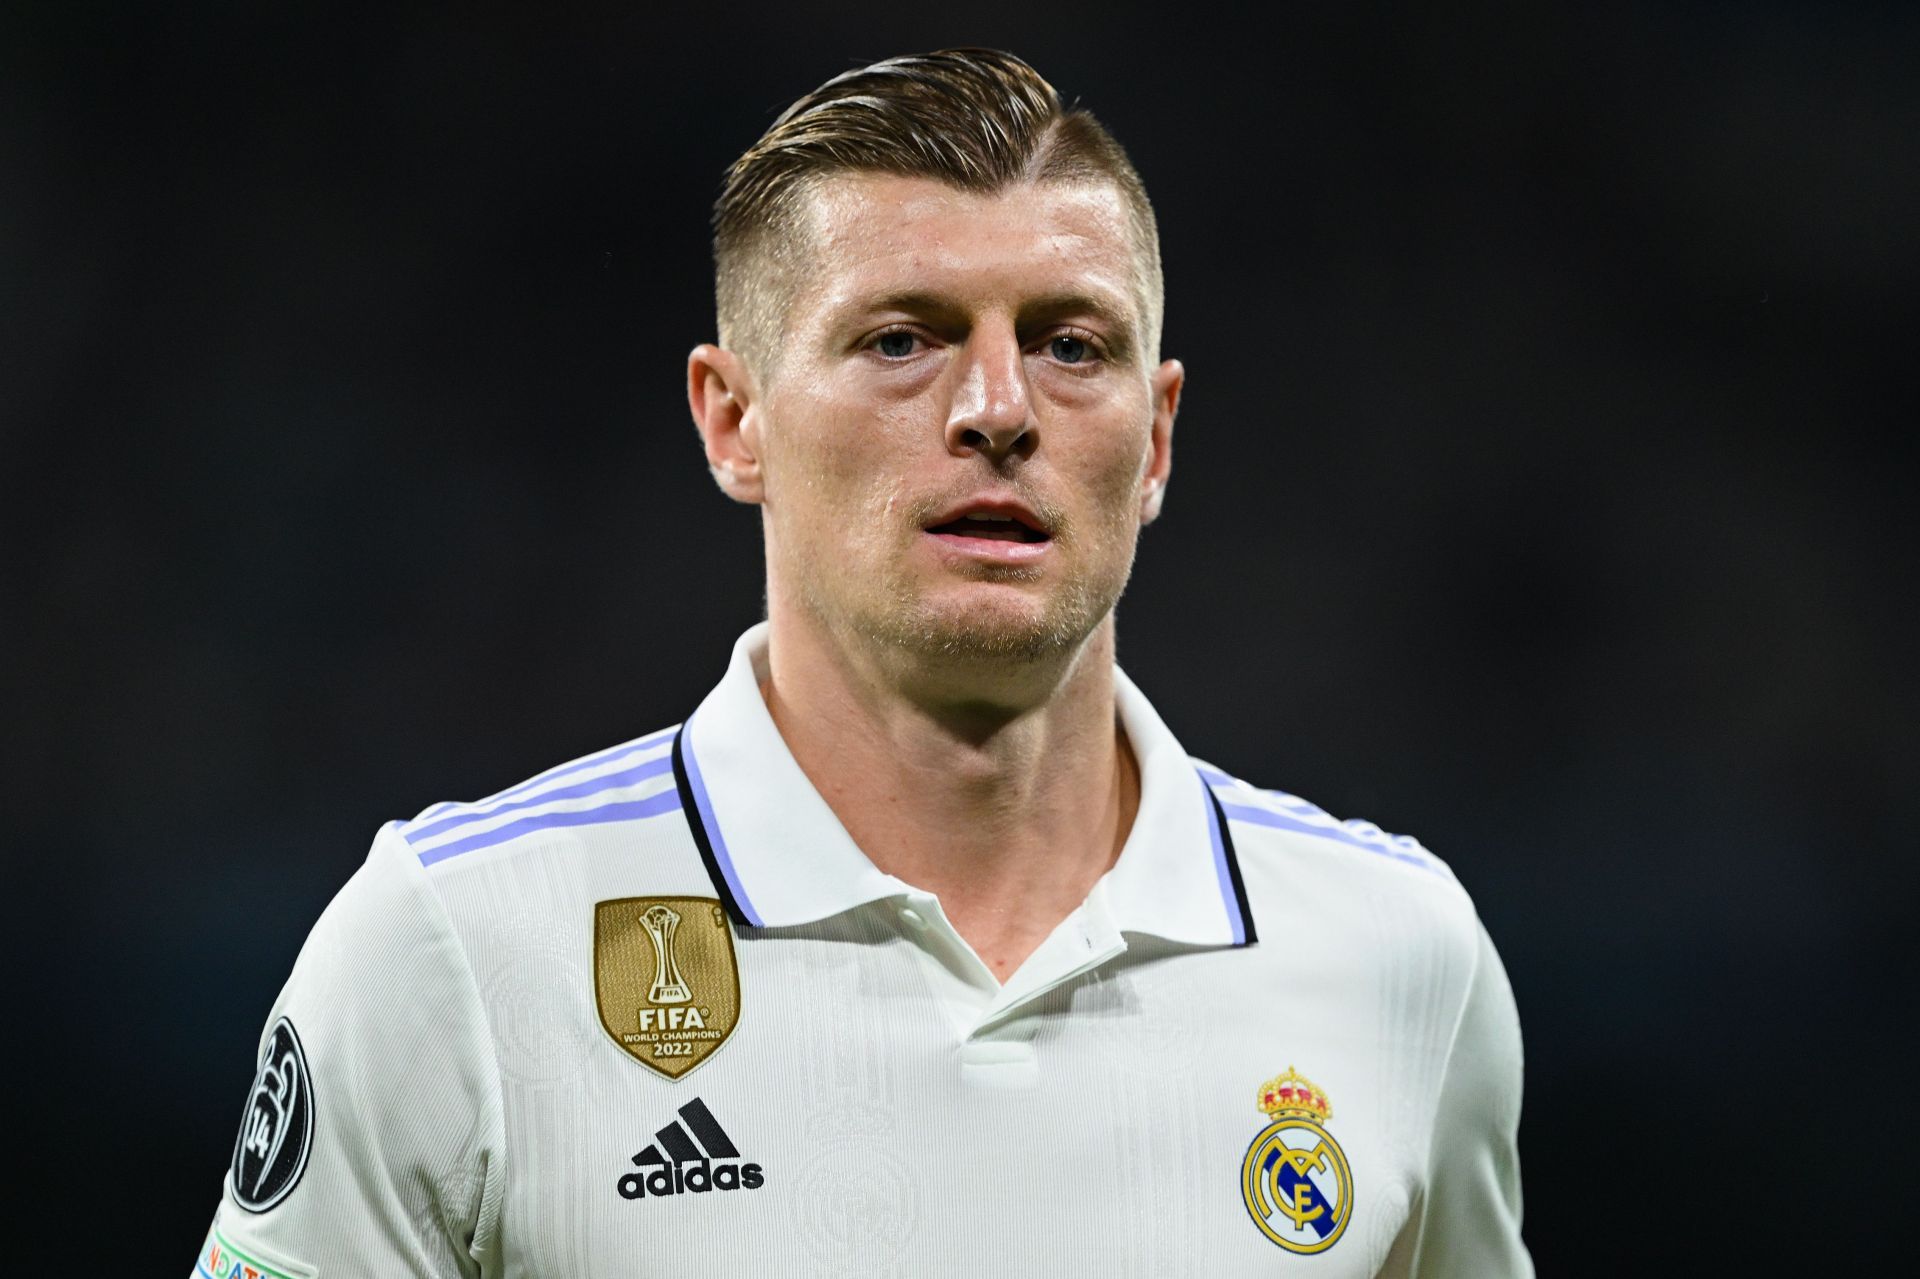 Toni Kroos looks set to stay at the Santiago Bernabeu.